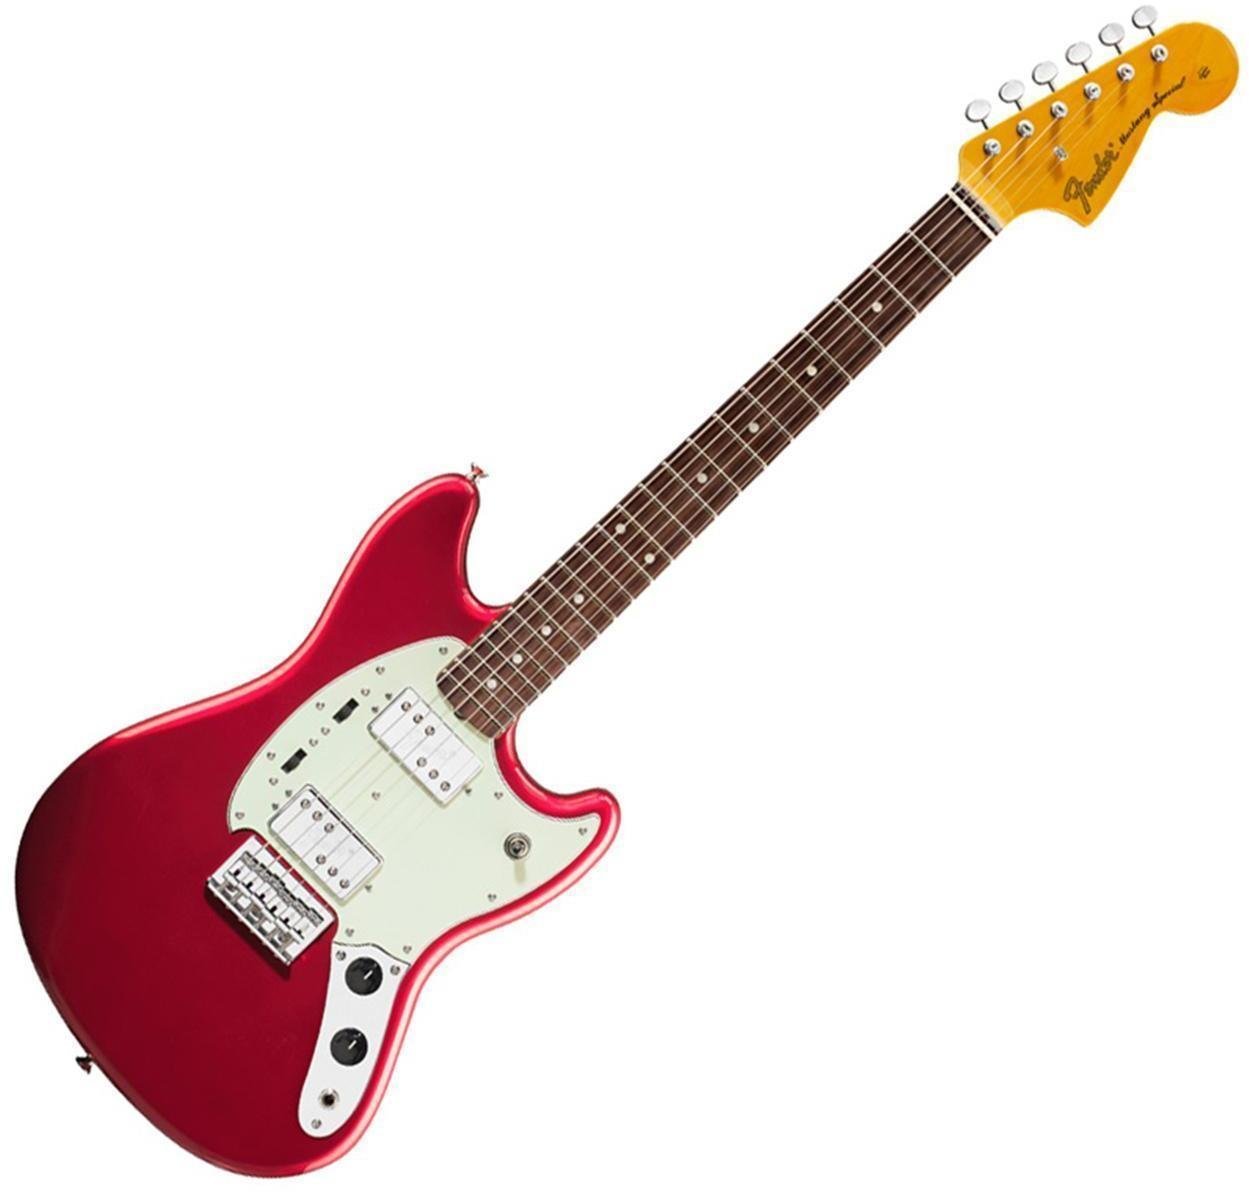 Electric guitar Fender Pawn Shop Mustang Special, Rosewood Fingerboard, Candy Apple Red